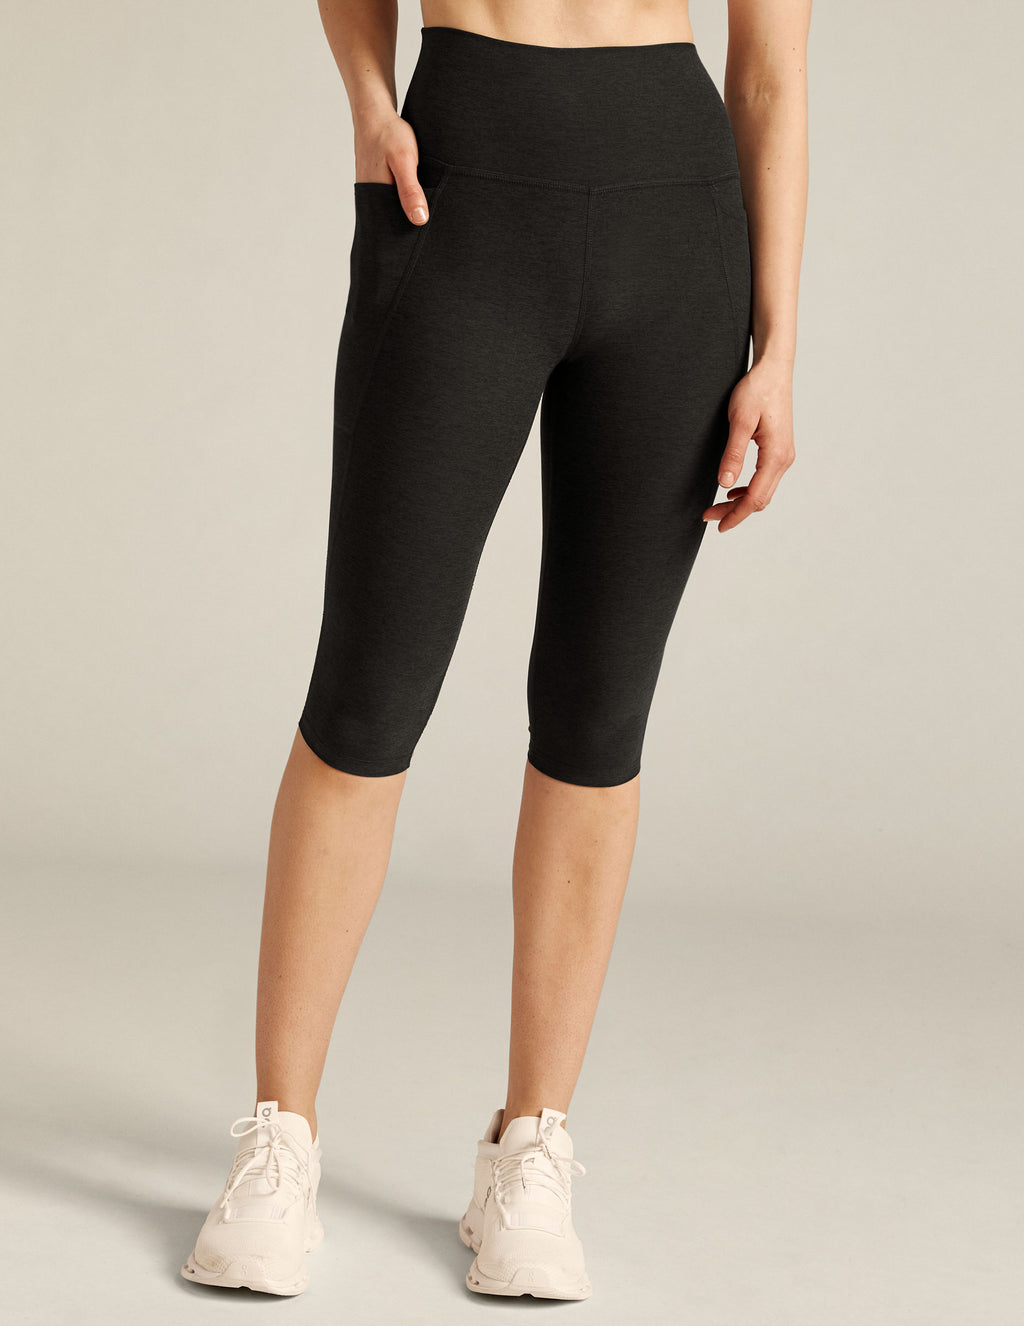 Spacedye High Waisted Pocket Pedal Pusher Legging Featured Image